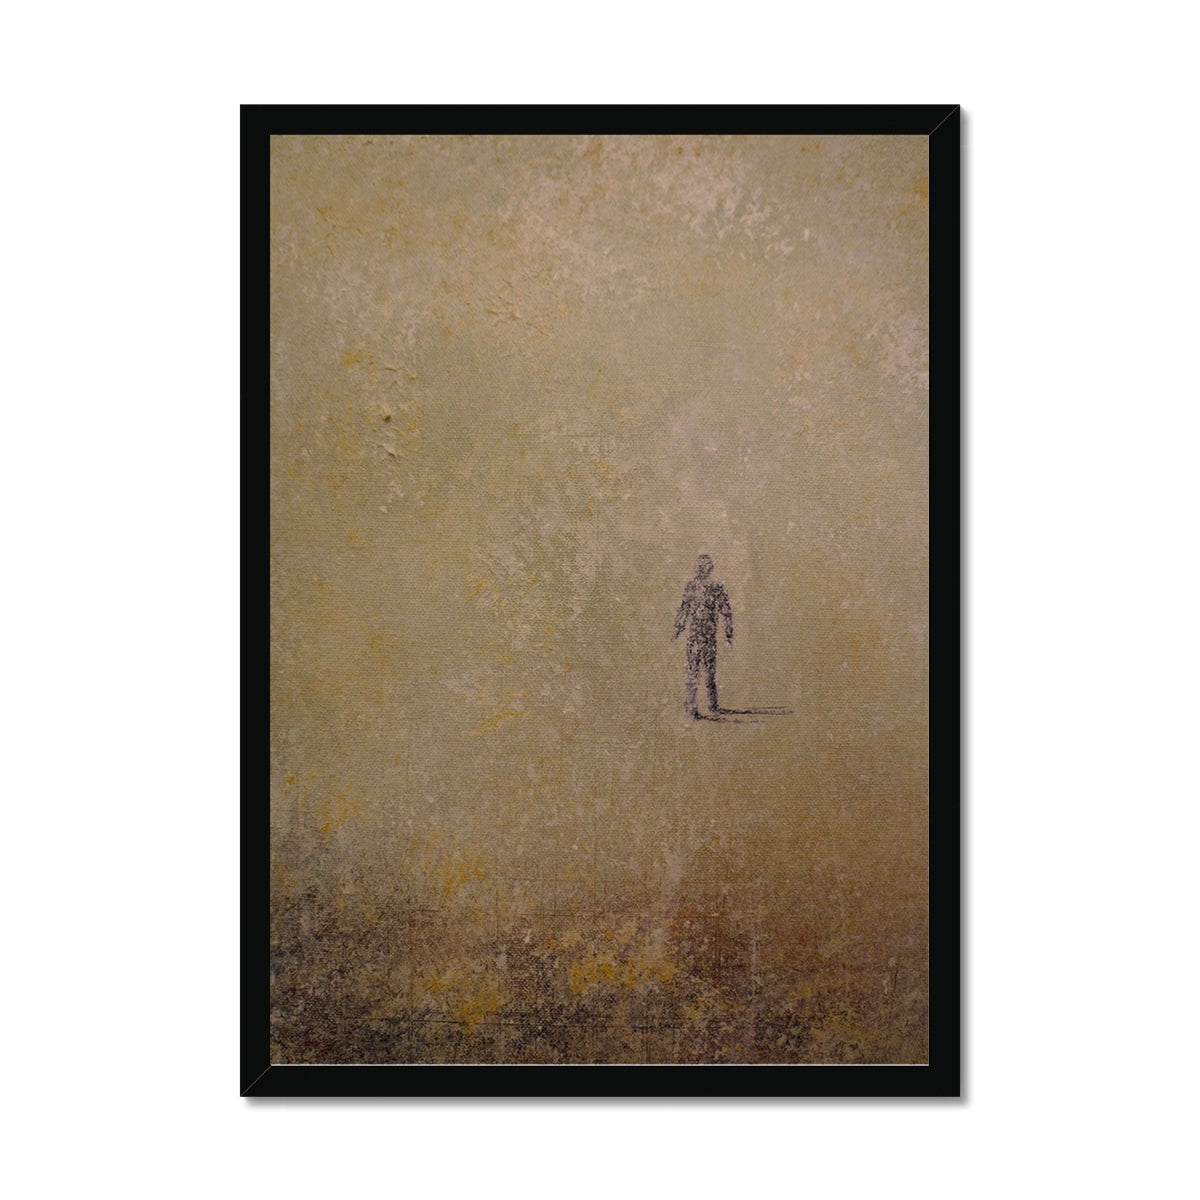 Into The Munro Mist Painting | Framed Prints From Scotland-Framed Prints-Abstract & Impressionistic Art Gallery-A2 Portrait-Black Frame-Paintings, Prints, Homeware, Art Gifts From Scotland By Scottish Artist Kevin Hunter